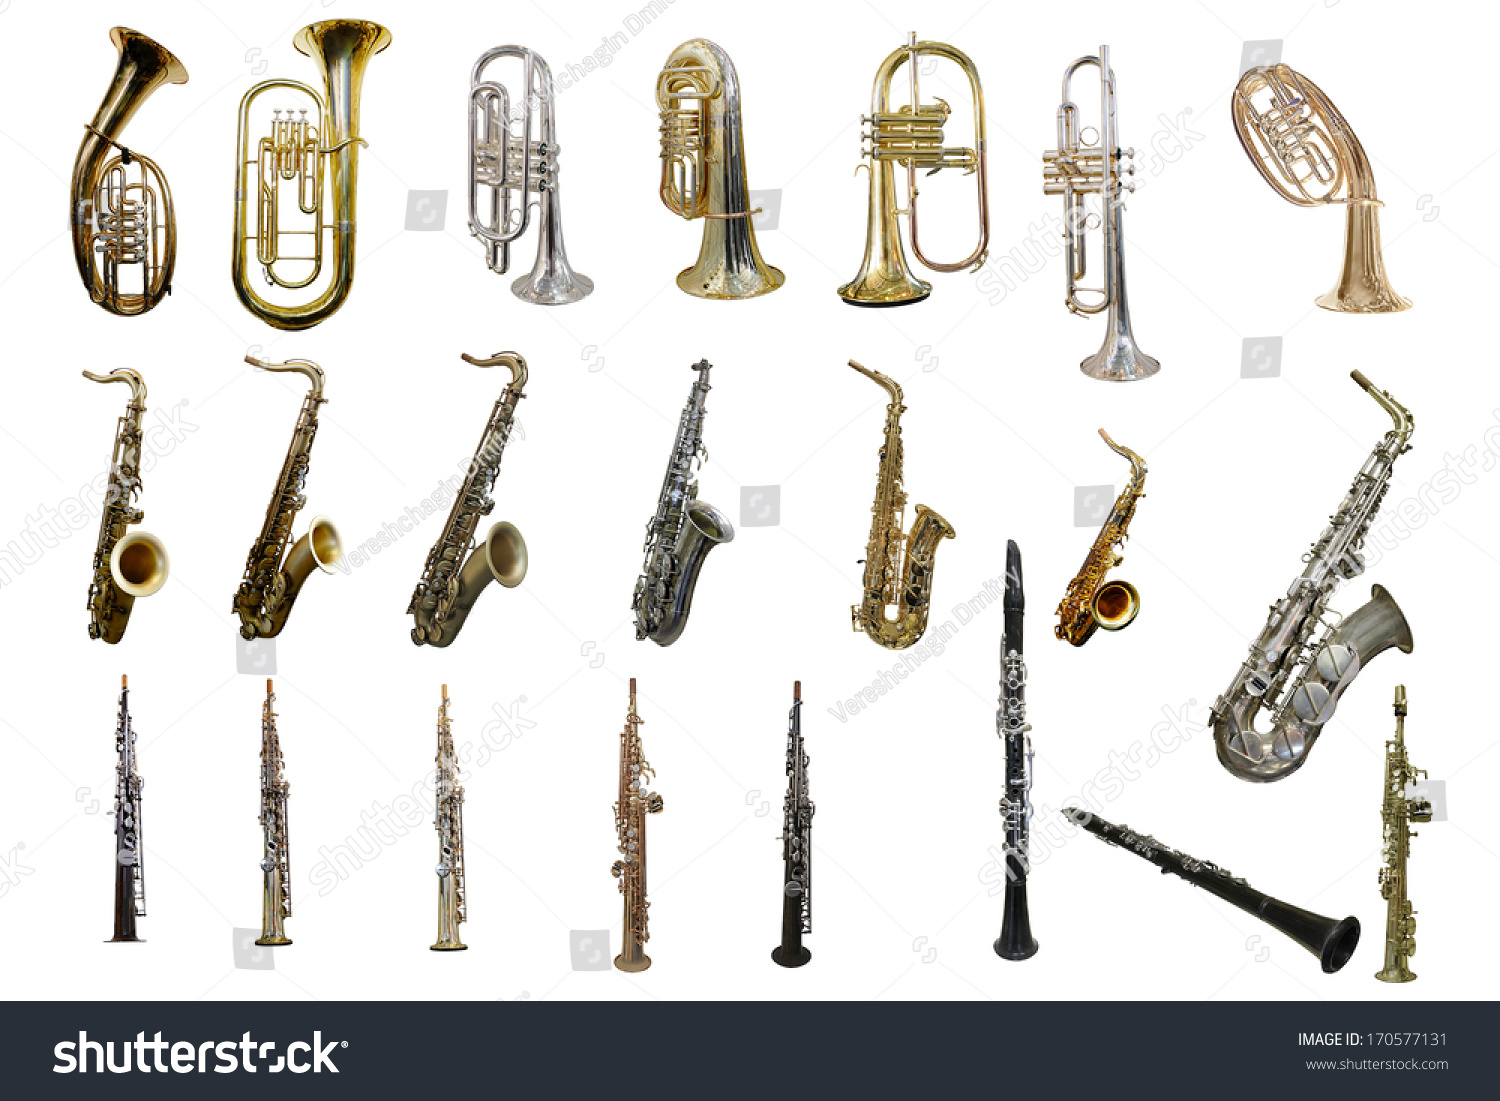 The image of wind instruments isolated under a white background #170577131